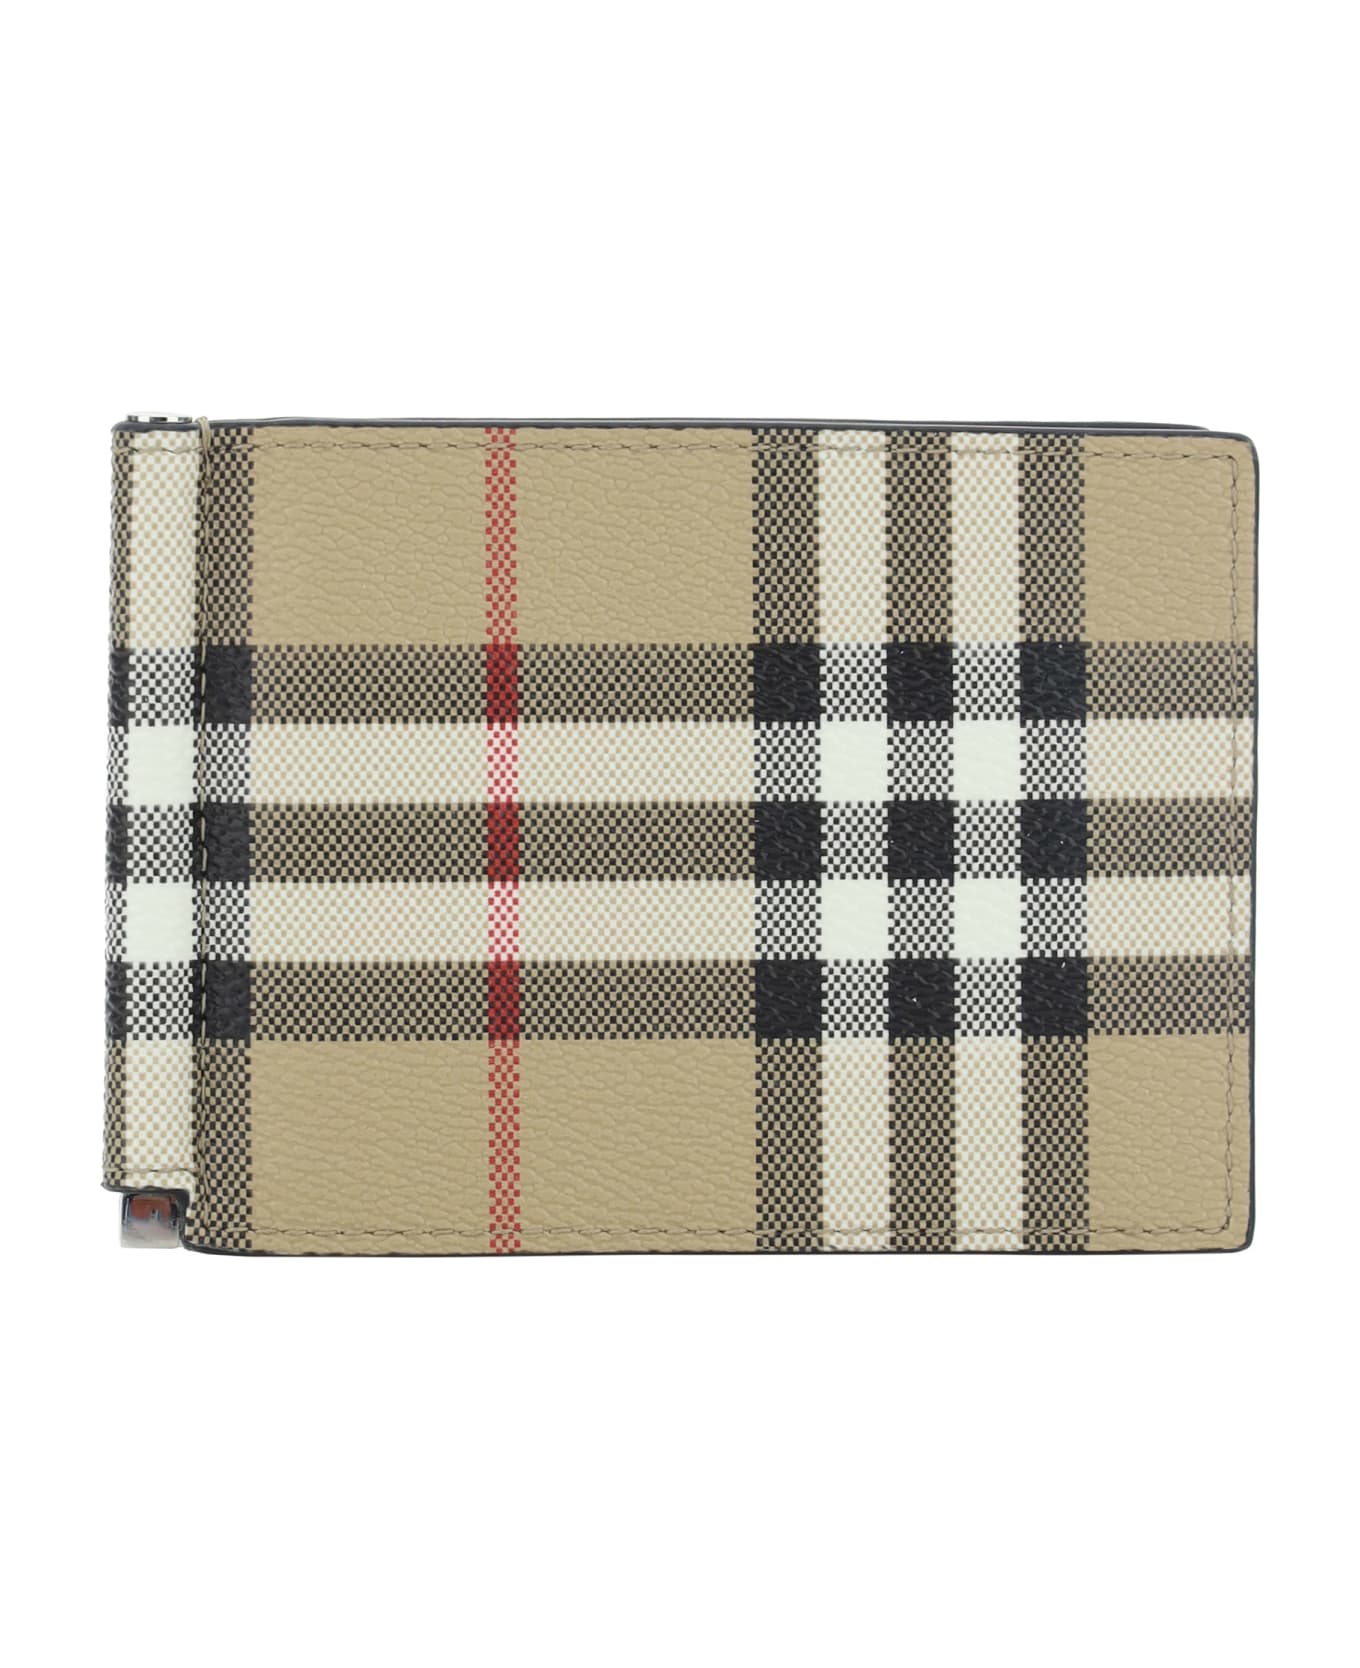 Burberry Chase Wallet - Beige 財布